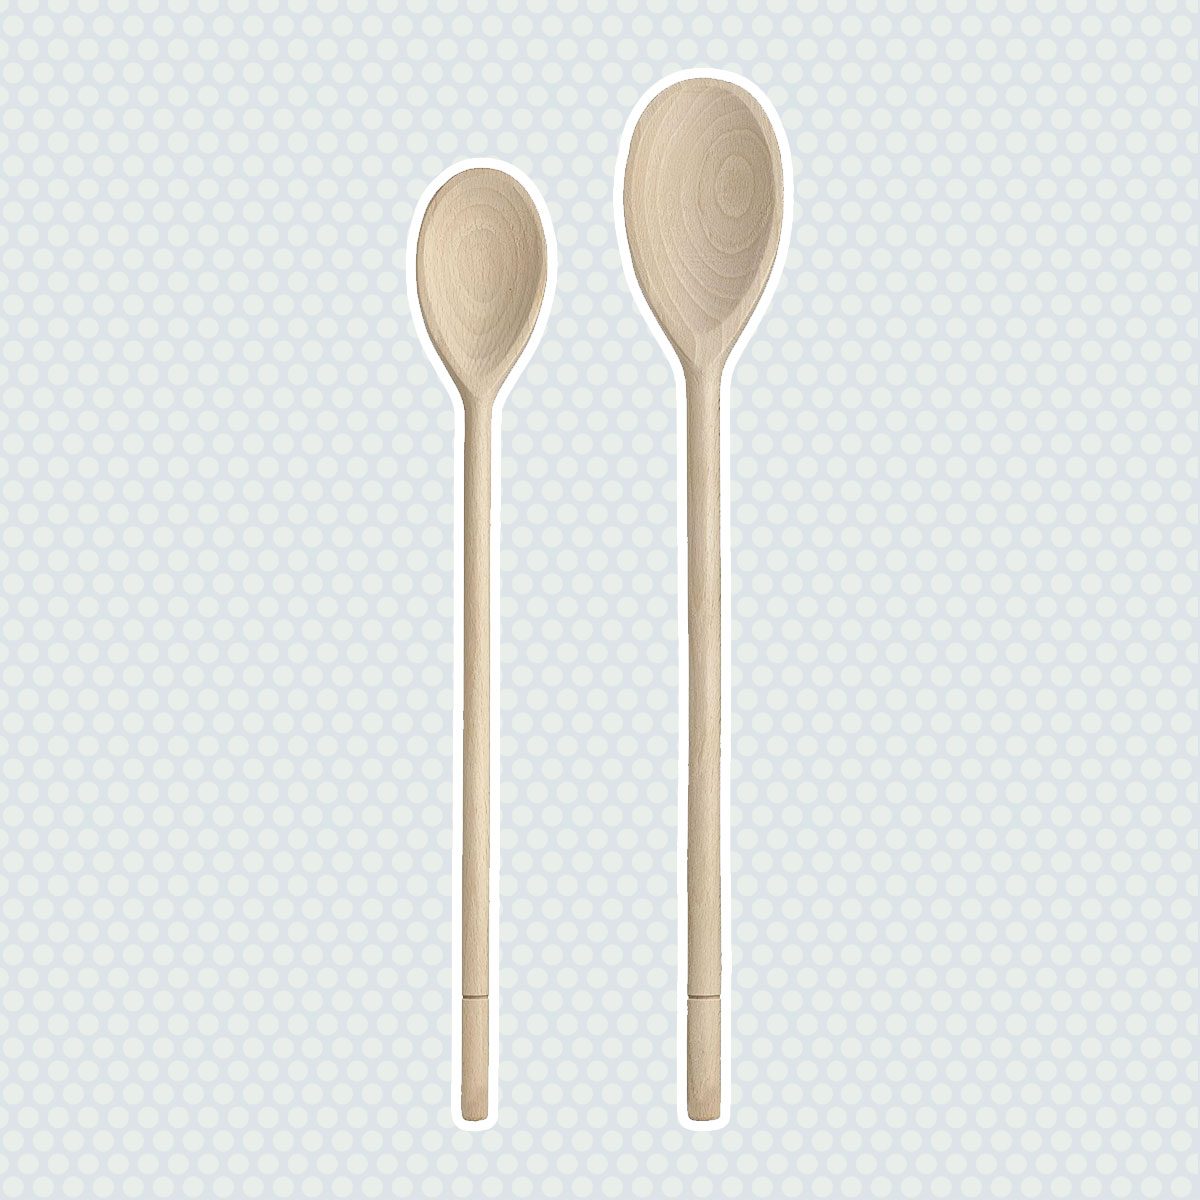 HIC Wooden Spoon Set, Set of 2, 14-Inch and 16-Inch